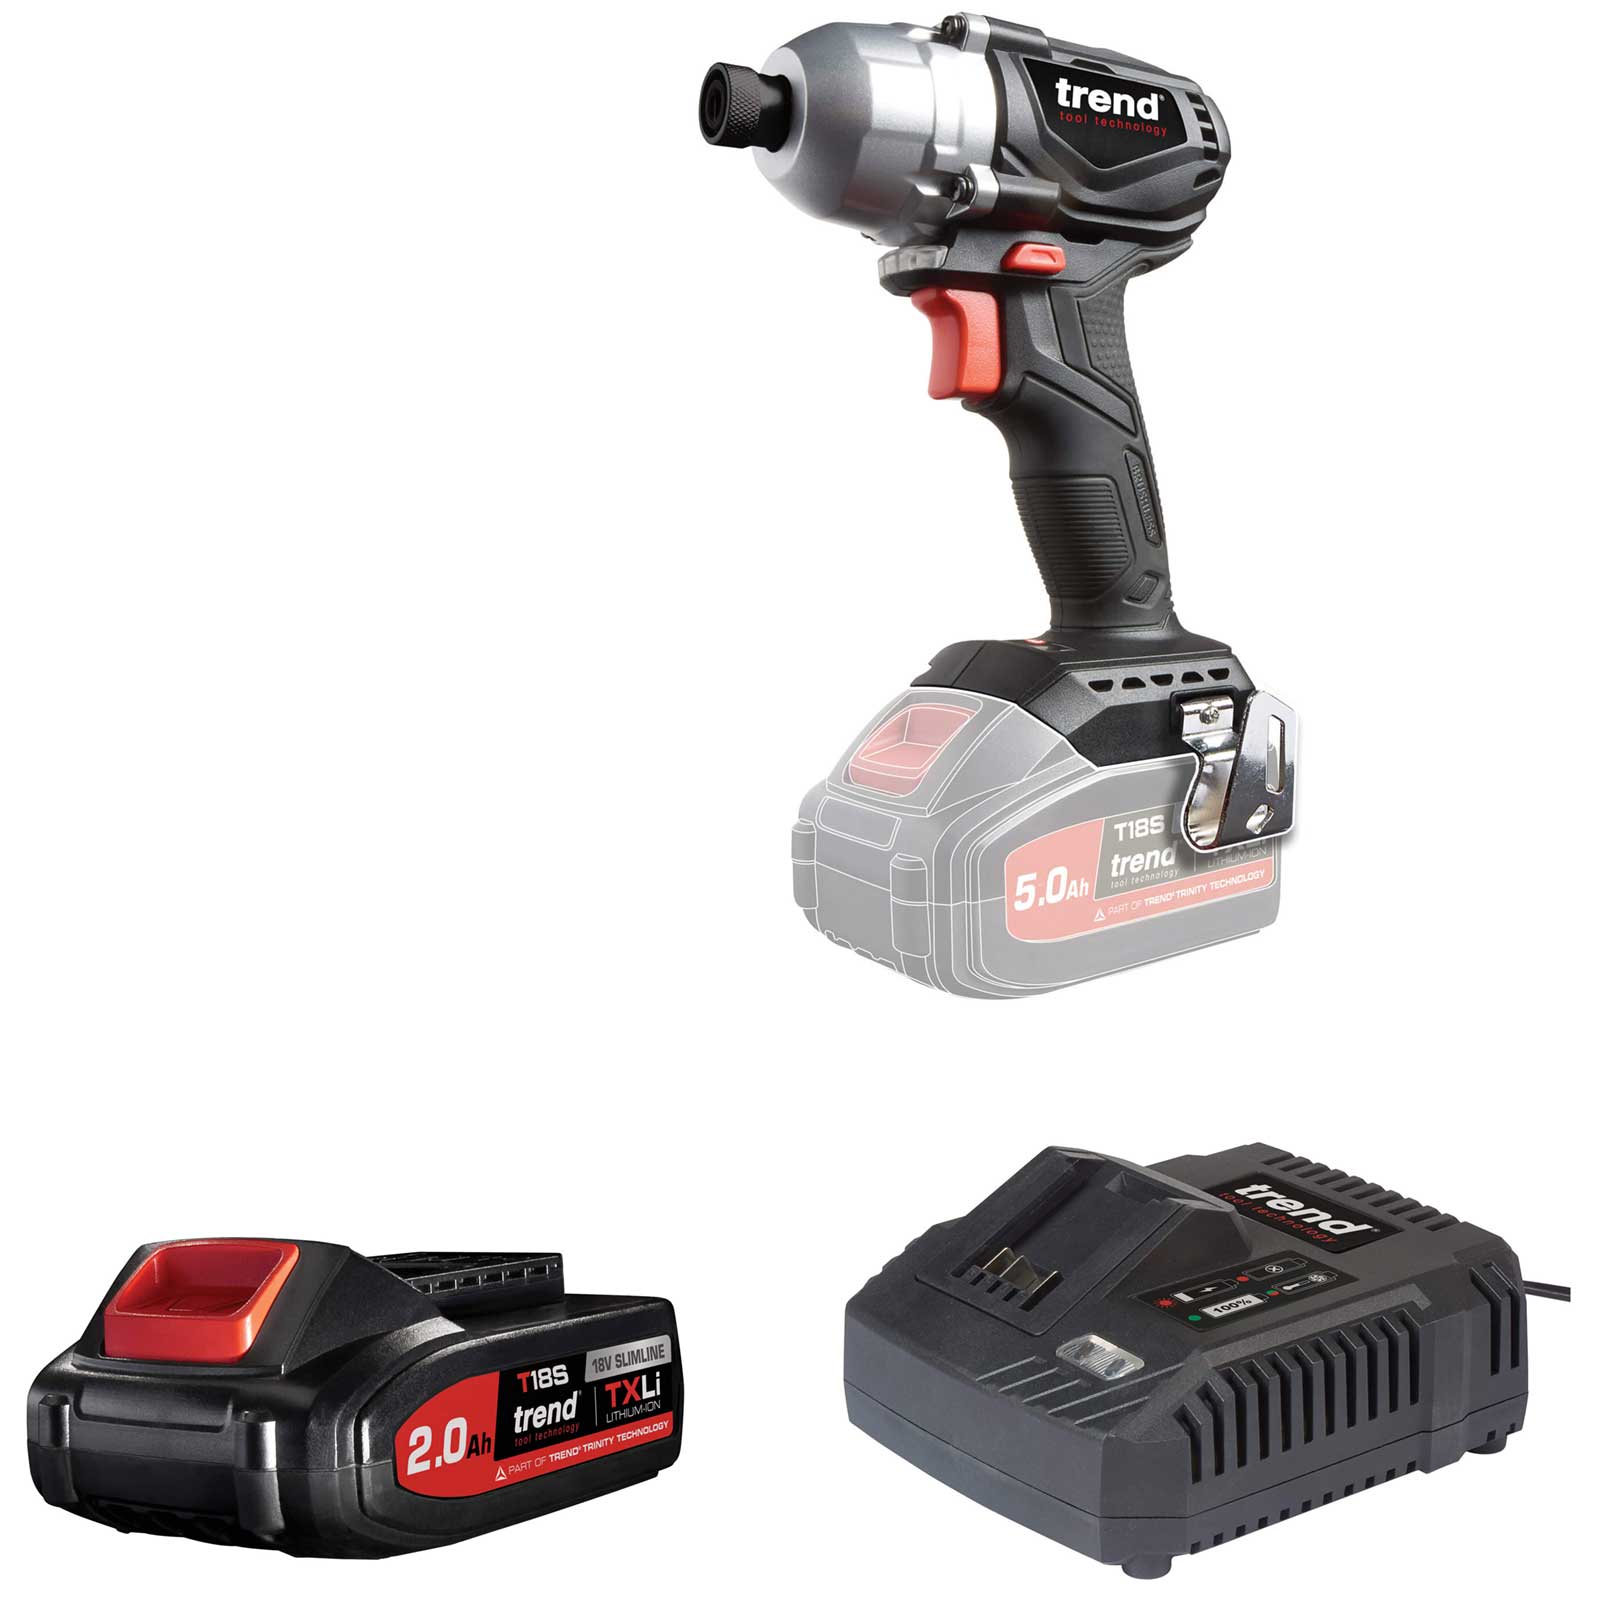 Photo of Trend T18s/idb 18v Cordless Brushless Impact Driver 1 X 2ah Li-ion Charger No Case